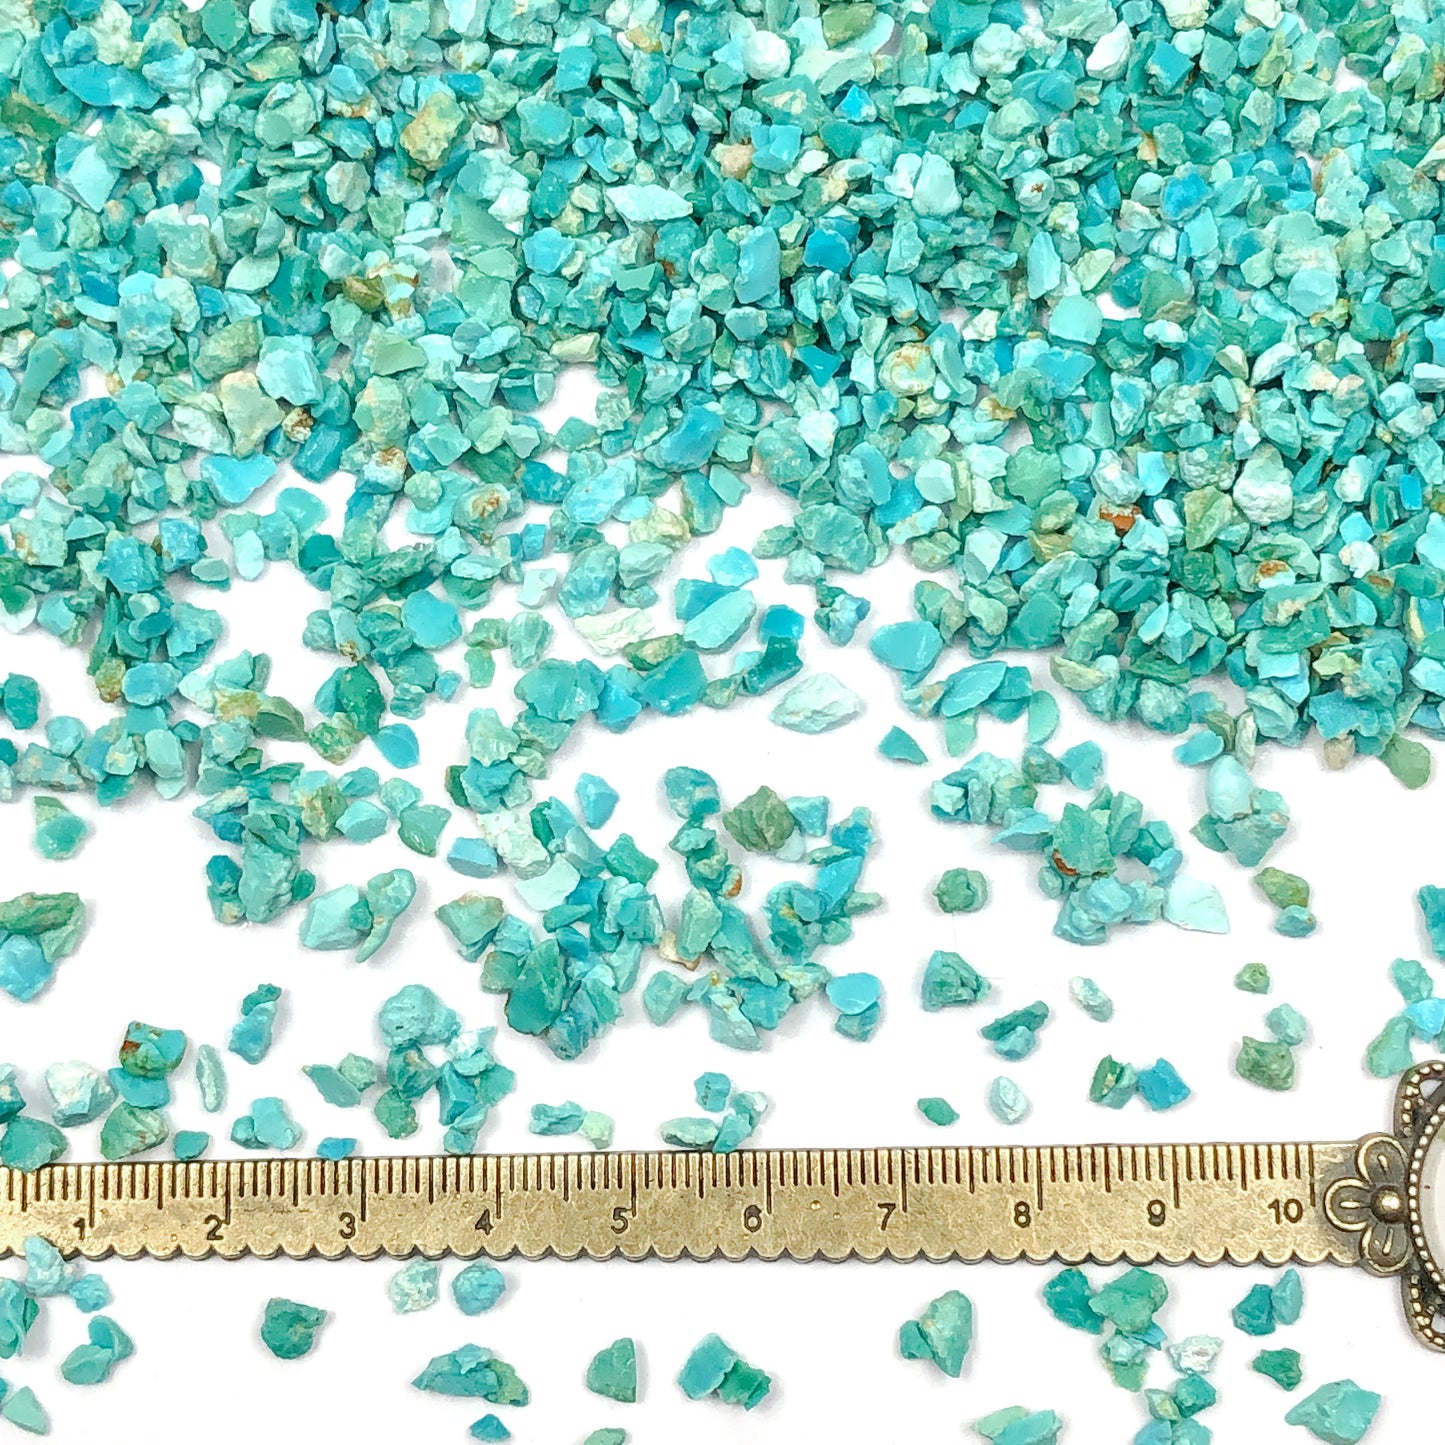 Crushed Blue-Green Fox Turquoise from Nevada, Coarse Crush, Gravel Size, 4mm - 2mm